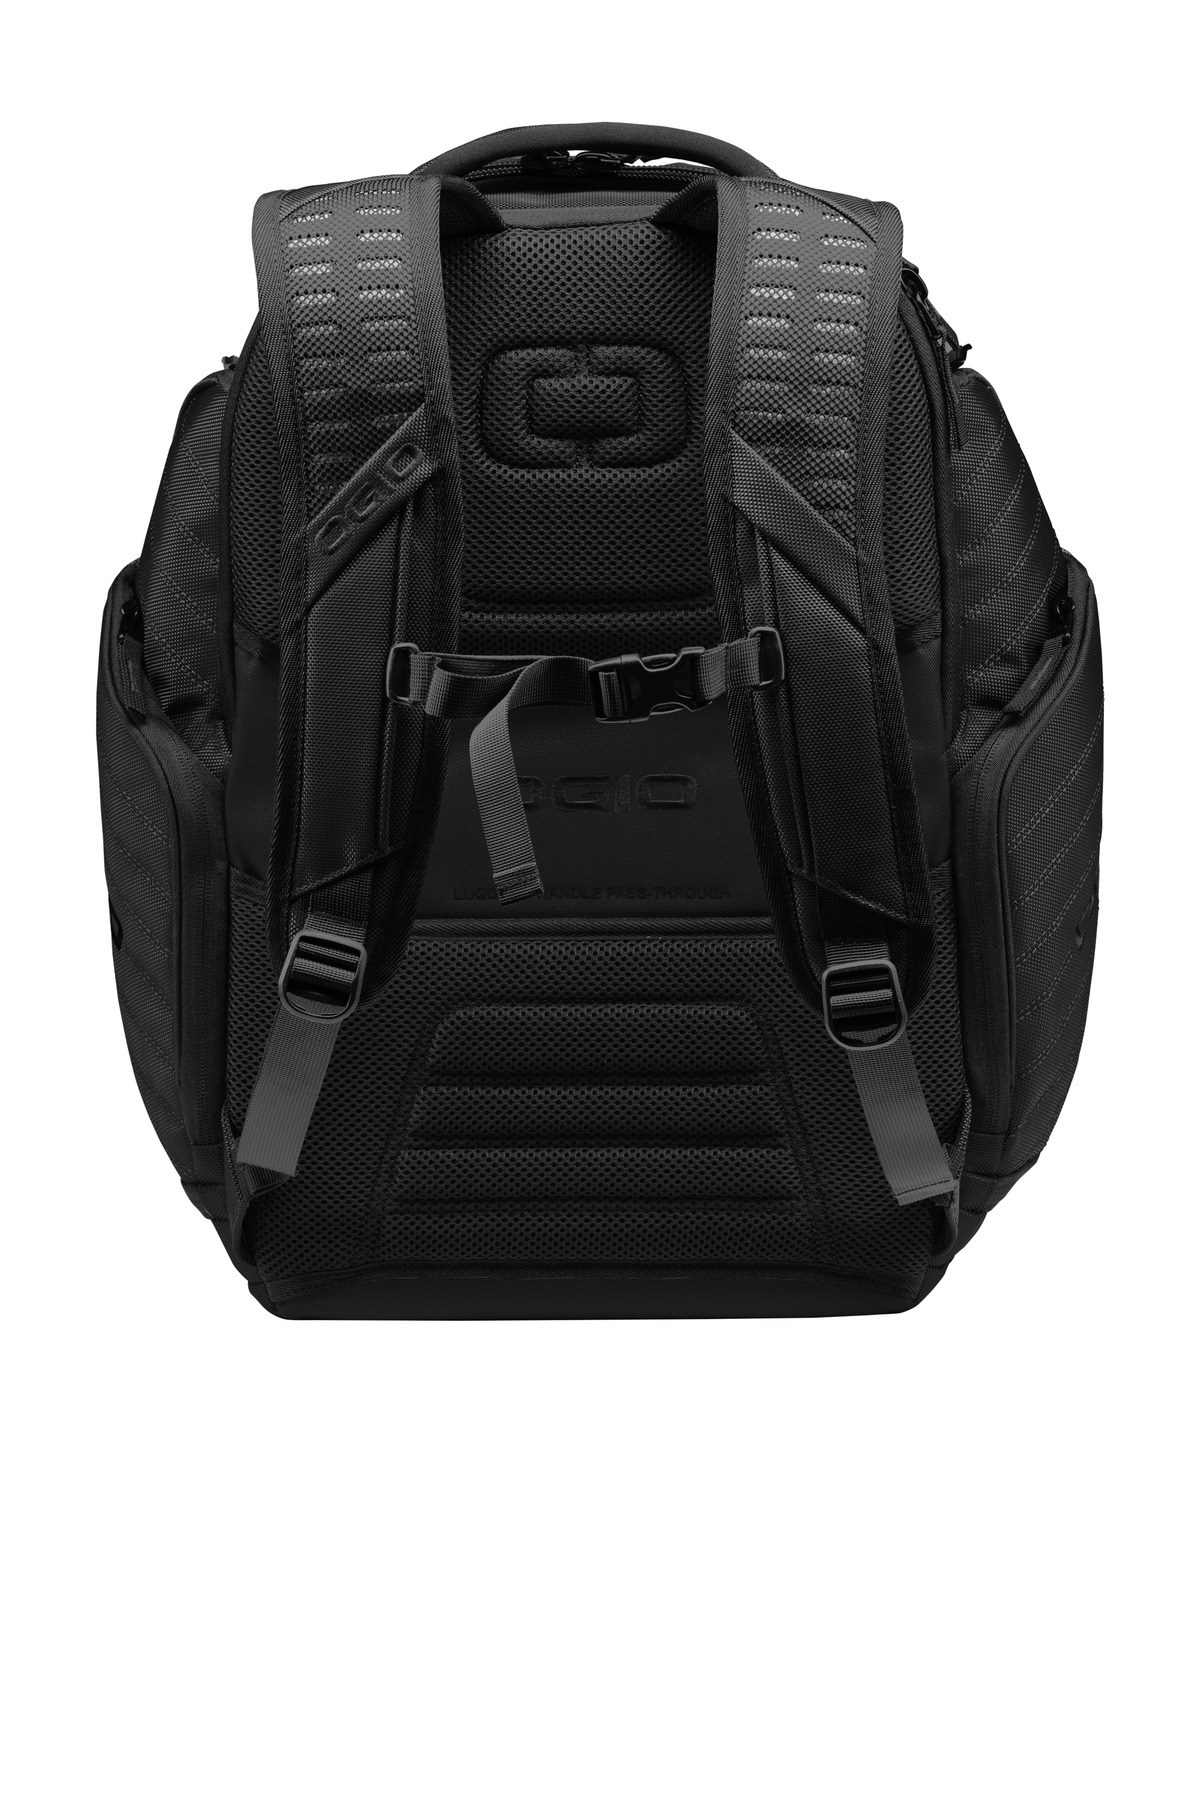 OGIO Flashpoint Pack. 91002